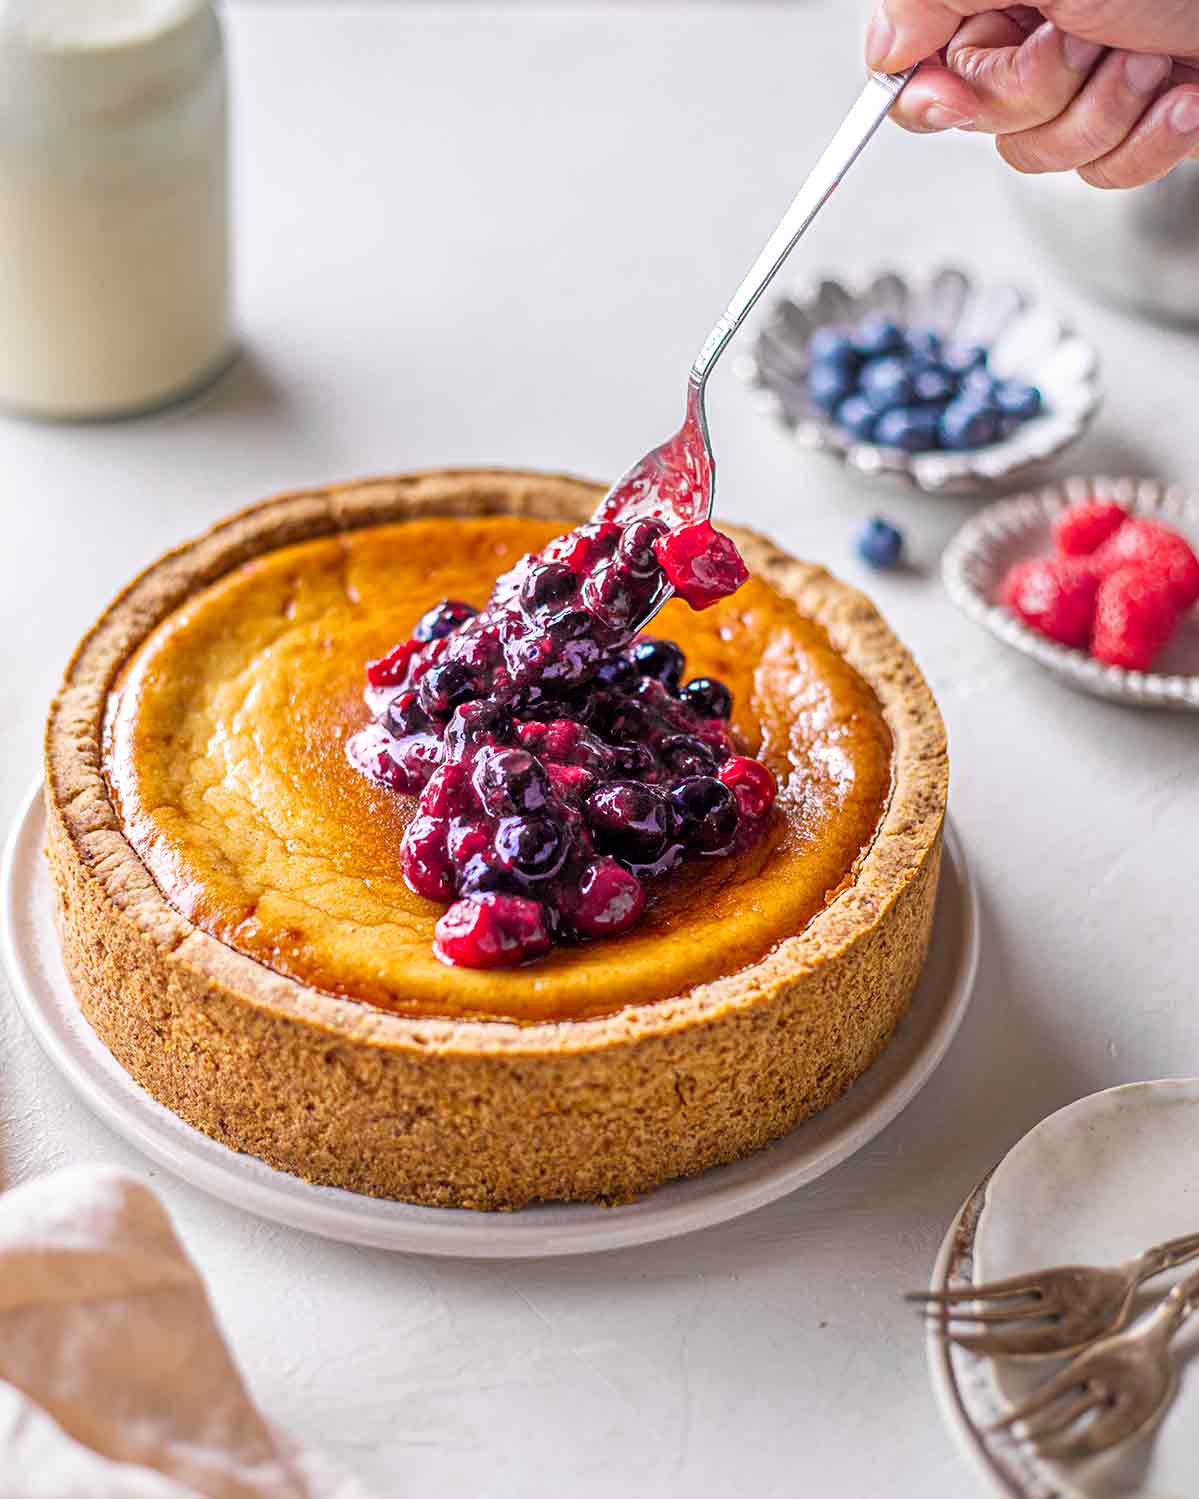 Stewed berries spooned onto naked baked cheesecake. Cheesecake has a golden surface.